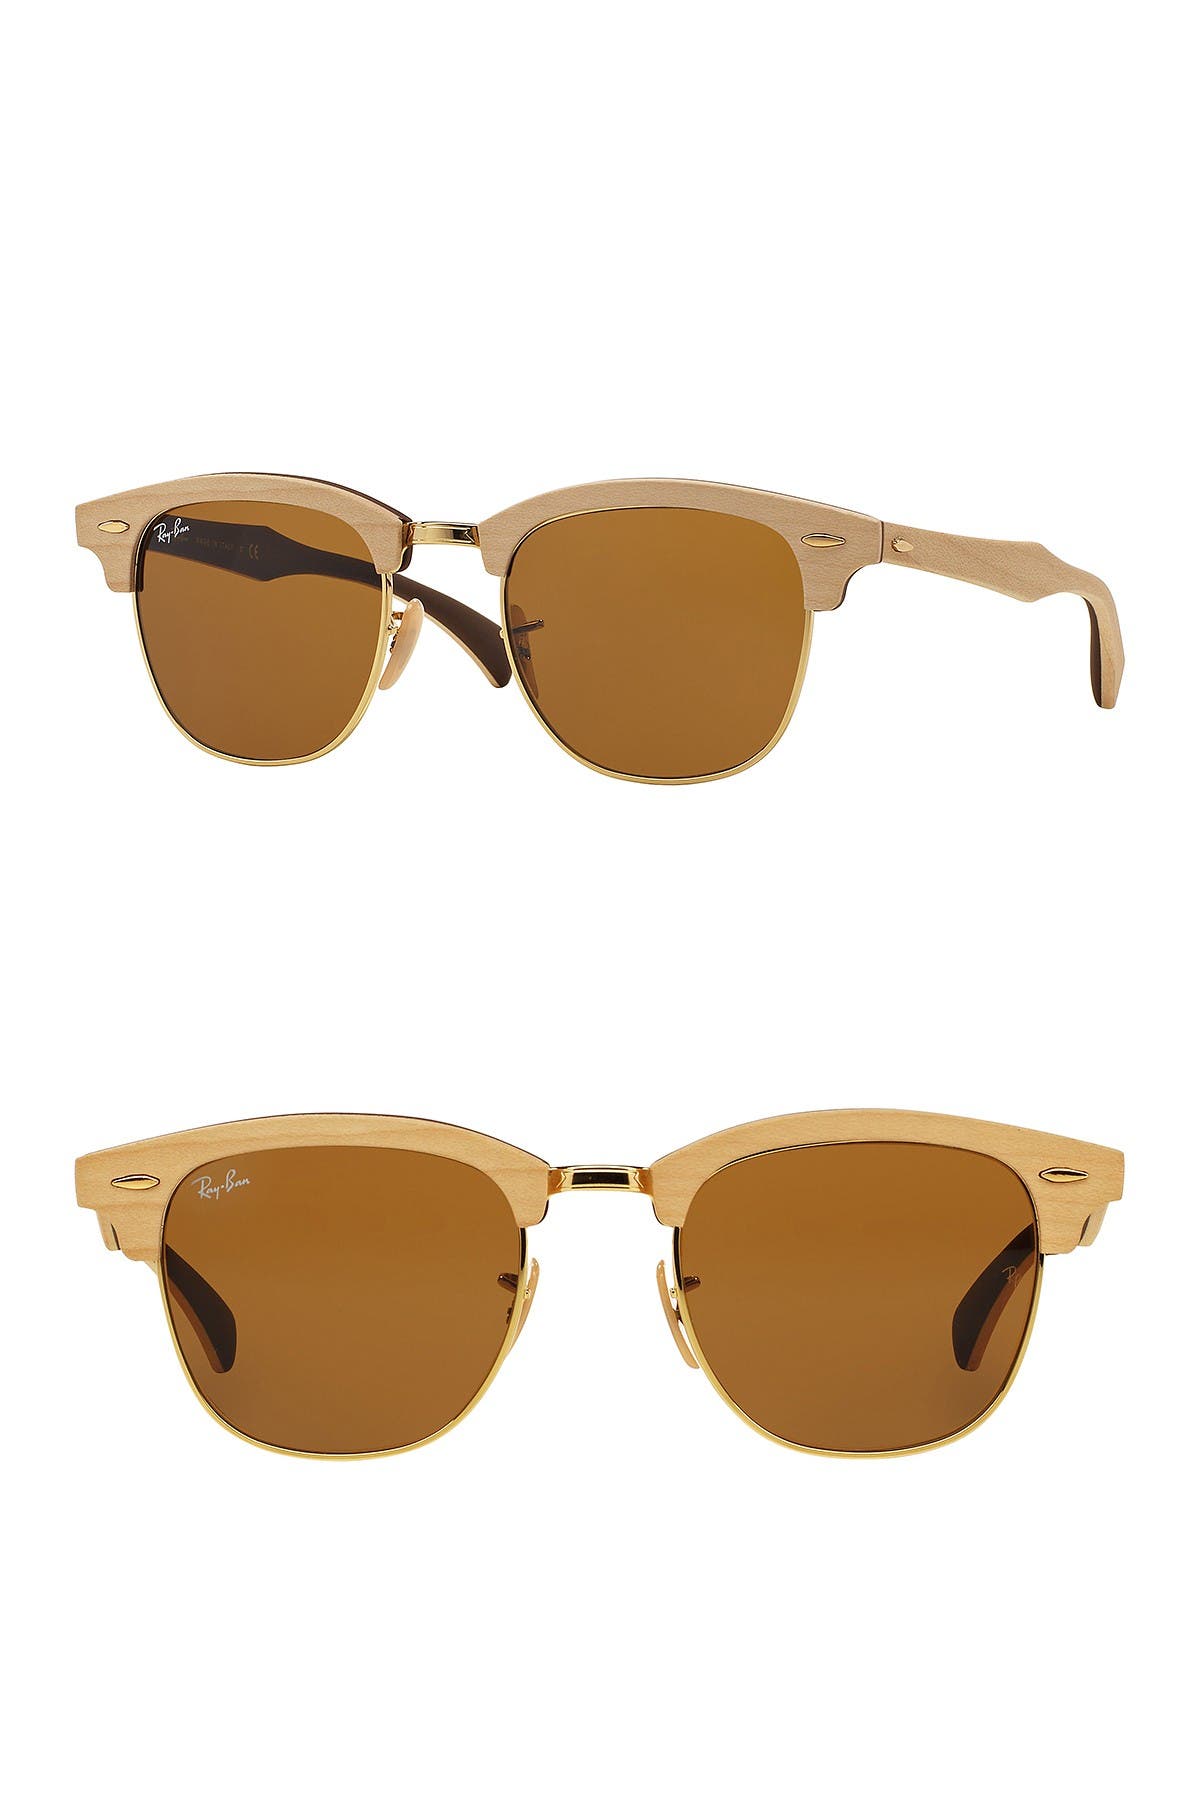 ray ban clubmaster sunglasses 51mm